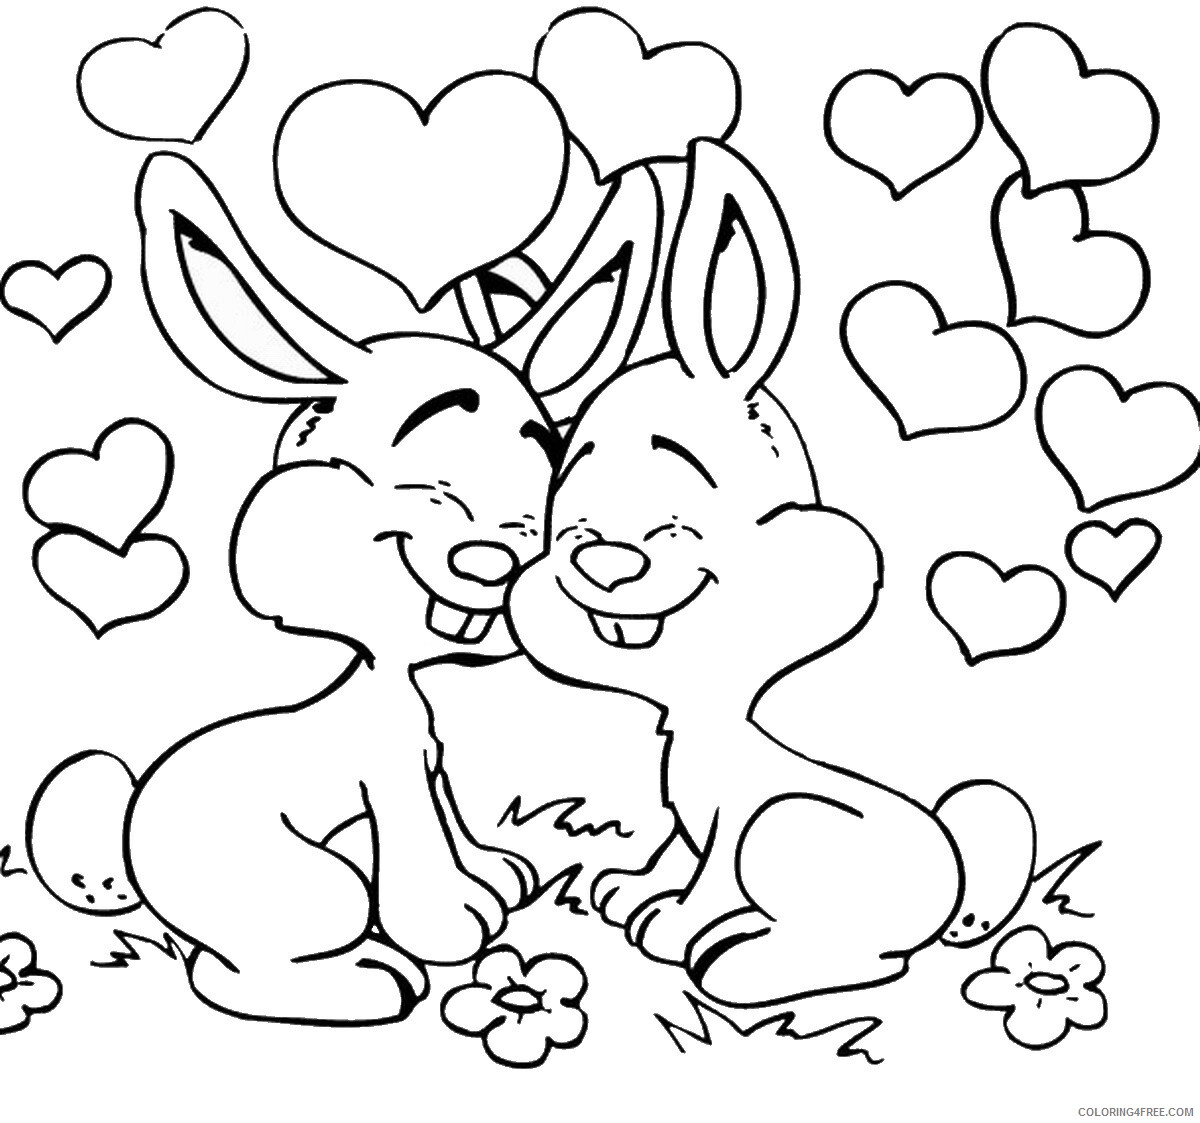 Rabbit Coloring Pages Animal Printable Sheets rabbit_cl2 2021 4170 Coloring4free